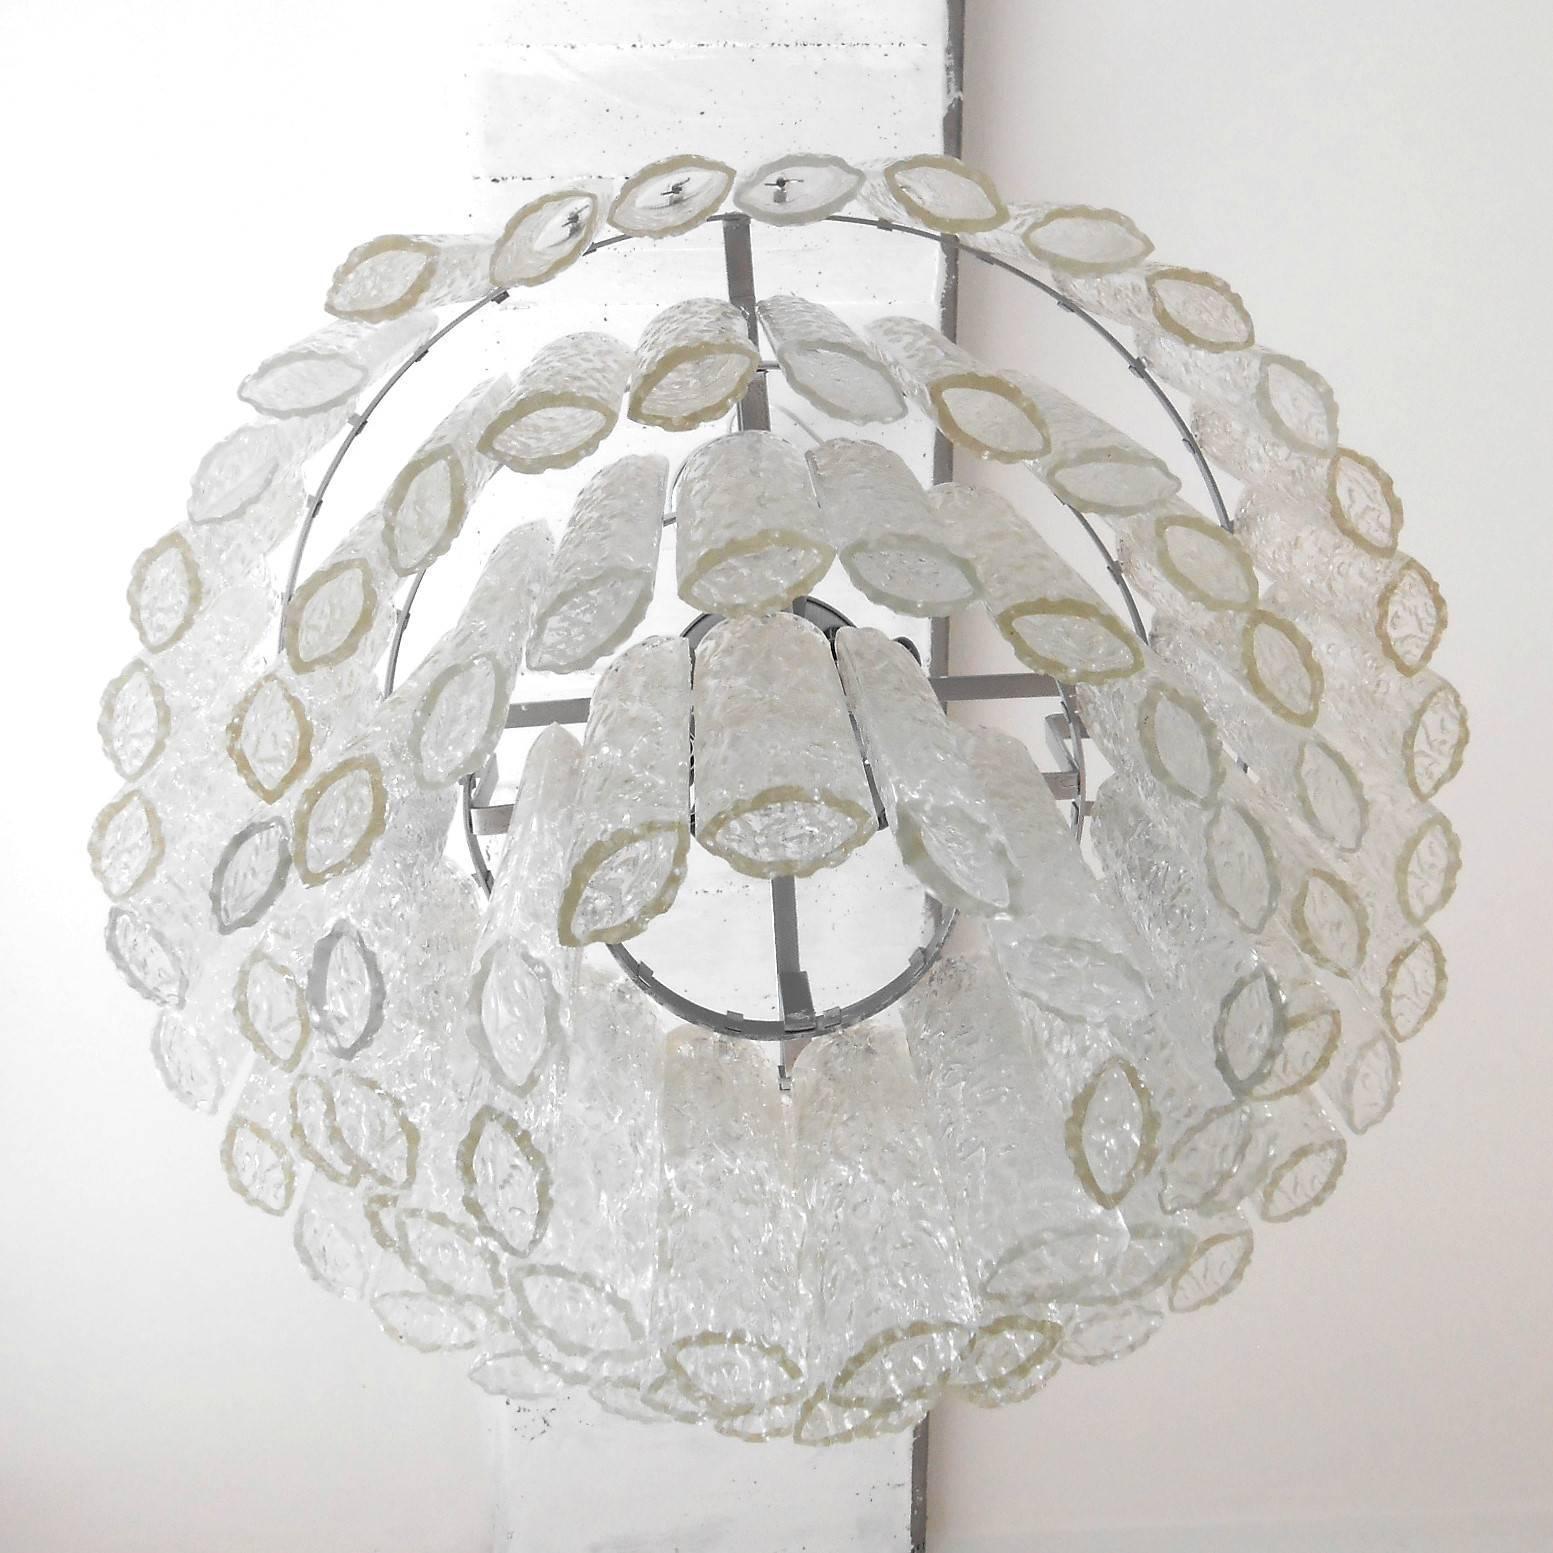 Vintage Italian chandelier with clear Murano glass tubes blown into beautiful oval shapes with textured designs, mounted on a tiered silver metal frame / Designed by Venini circa 1960’s /made in Italy.